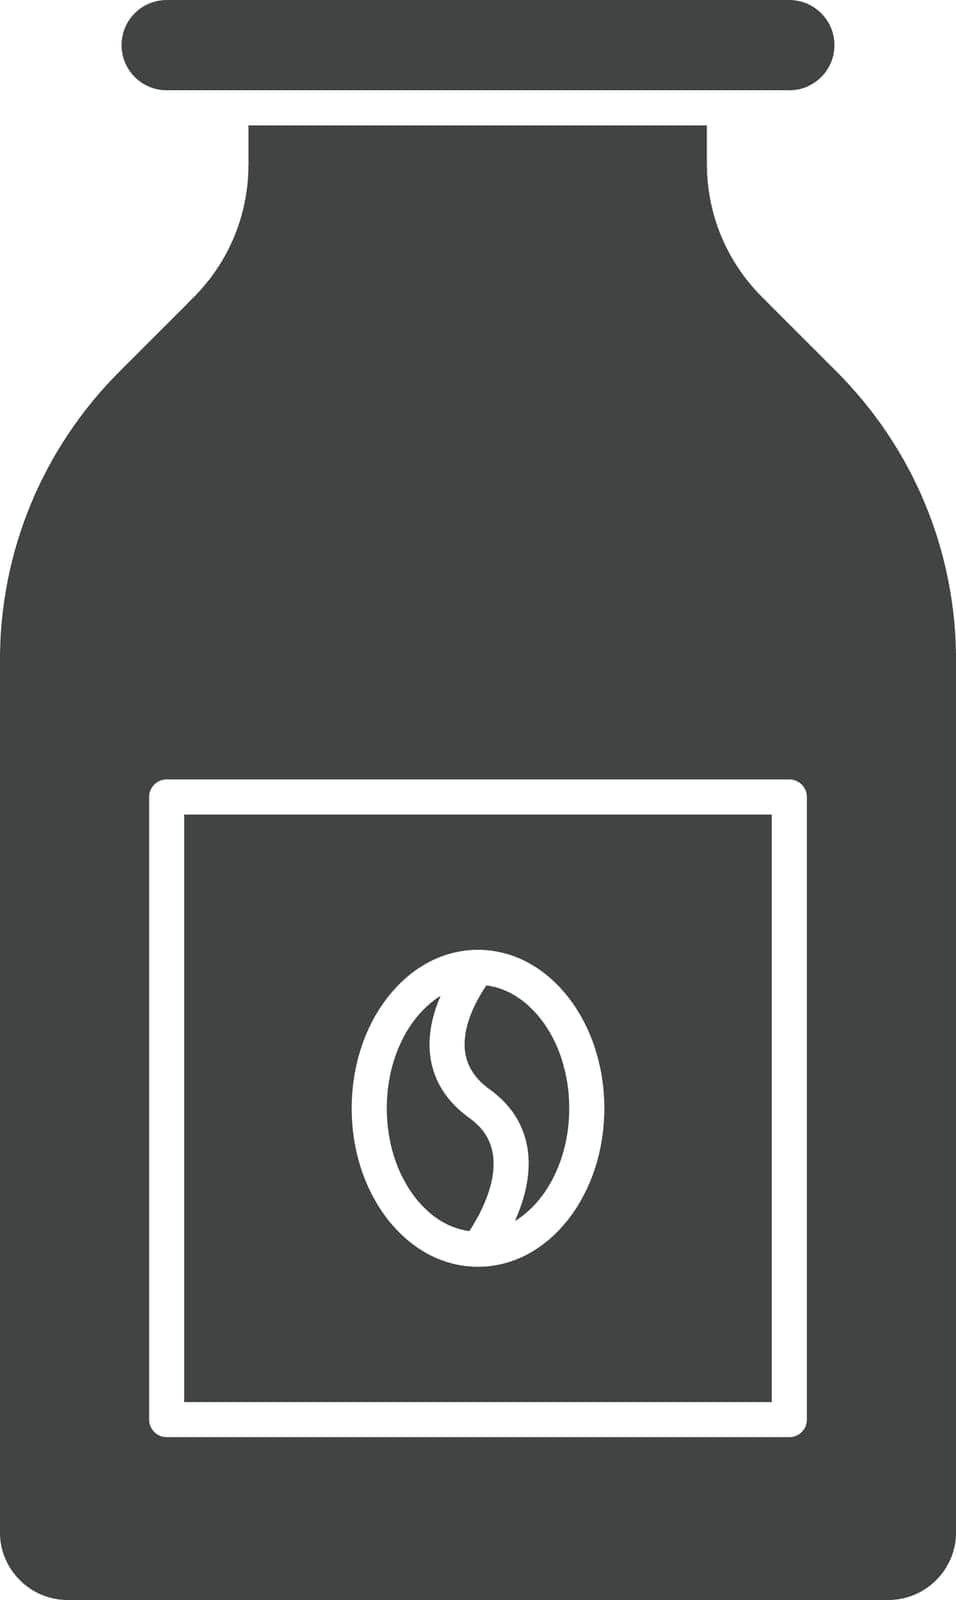 Coffee bottle icon vector image. Suitable for mobile application web application and print media.